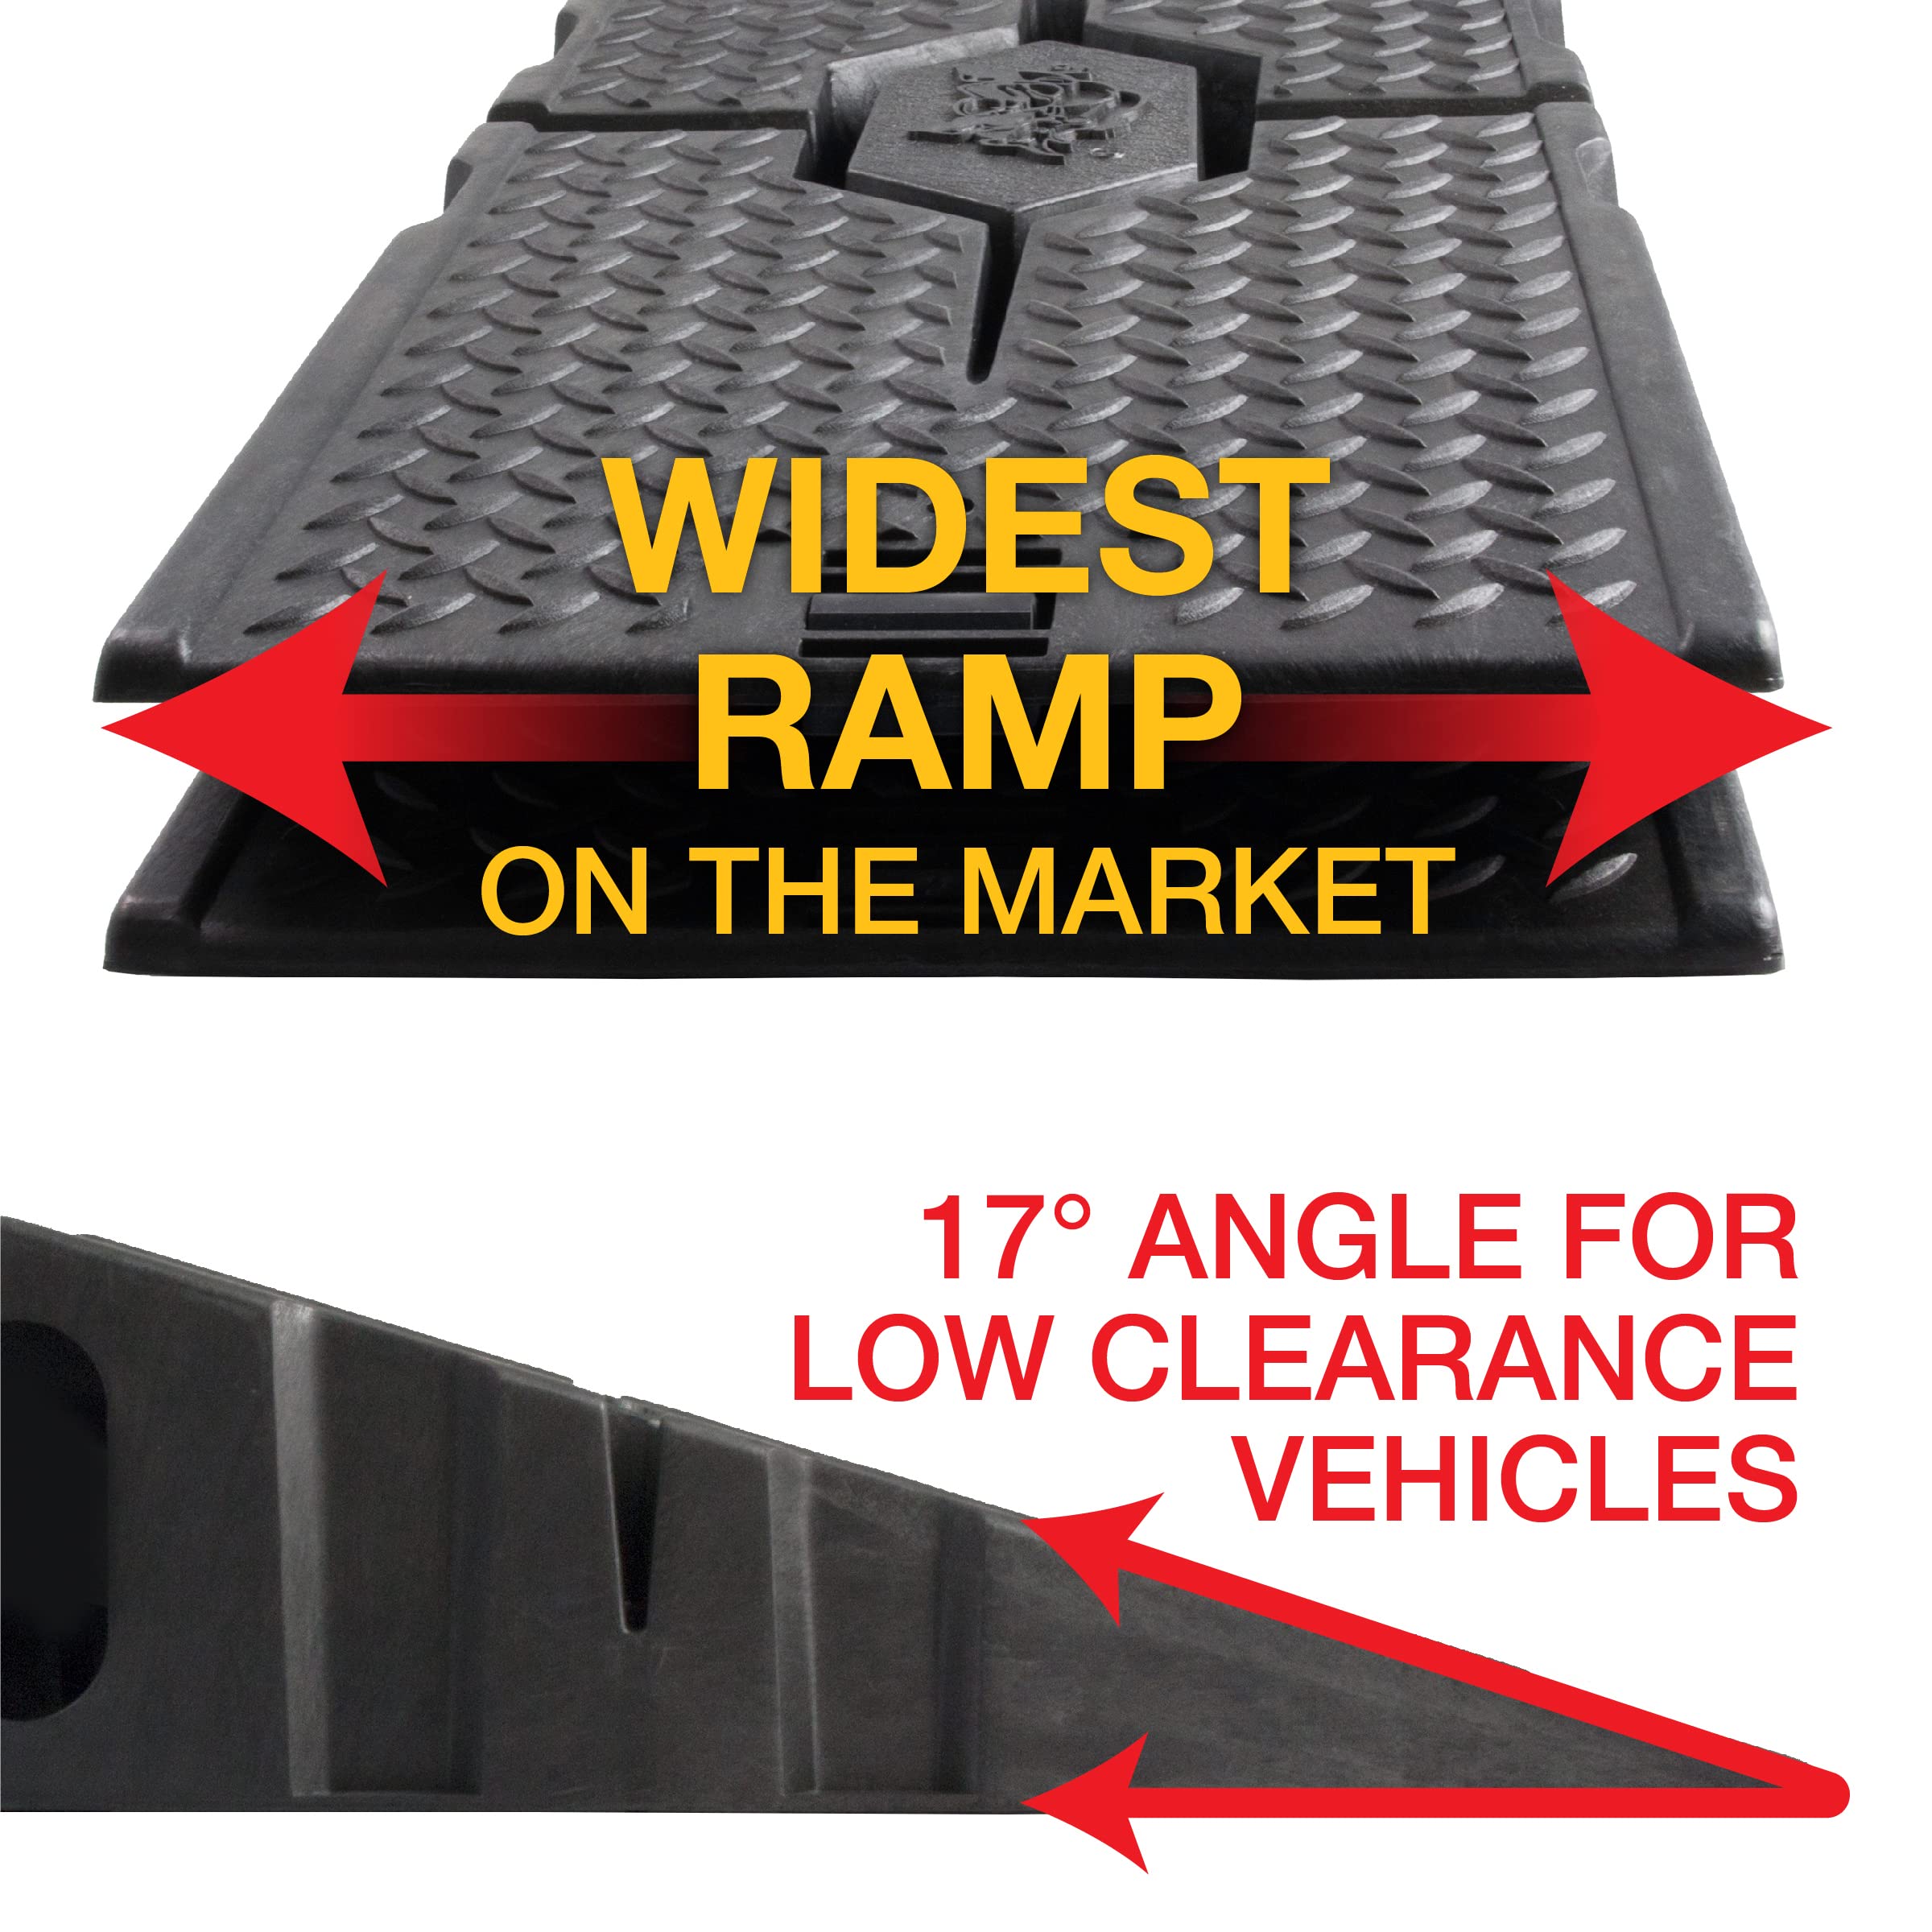 FloTool 11912ABMI RhinoRamp MAX Vehicle Ramp Pair - Ideal for Heavy-Duty Home Garage Maintenance - Reduces Slippage - Works with Low Clearance Vehicles - 16,000lb GVW Capacity - Extra-Wide Design